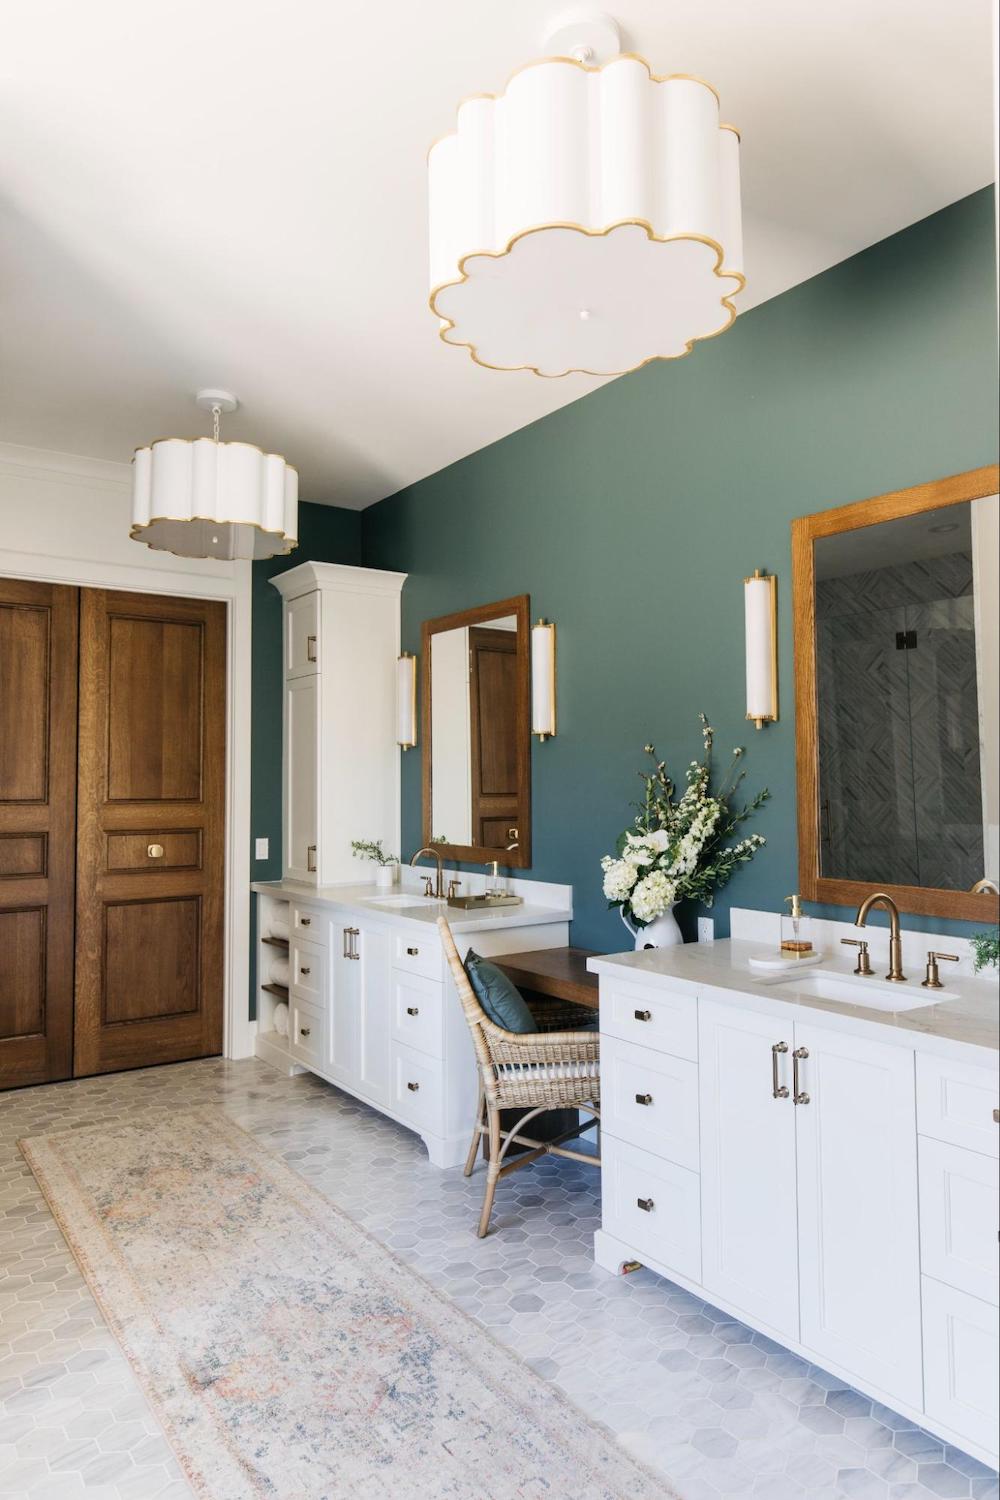 Traditional double vanity with inset cabinetry.